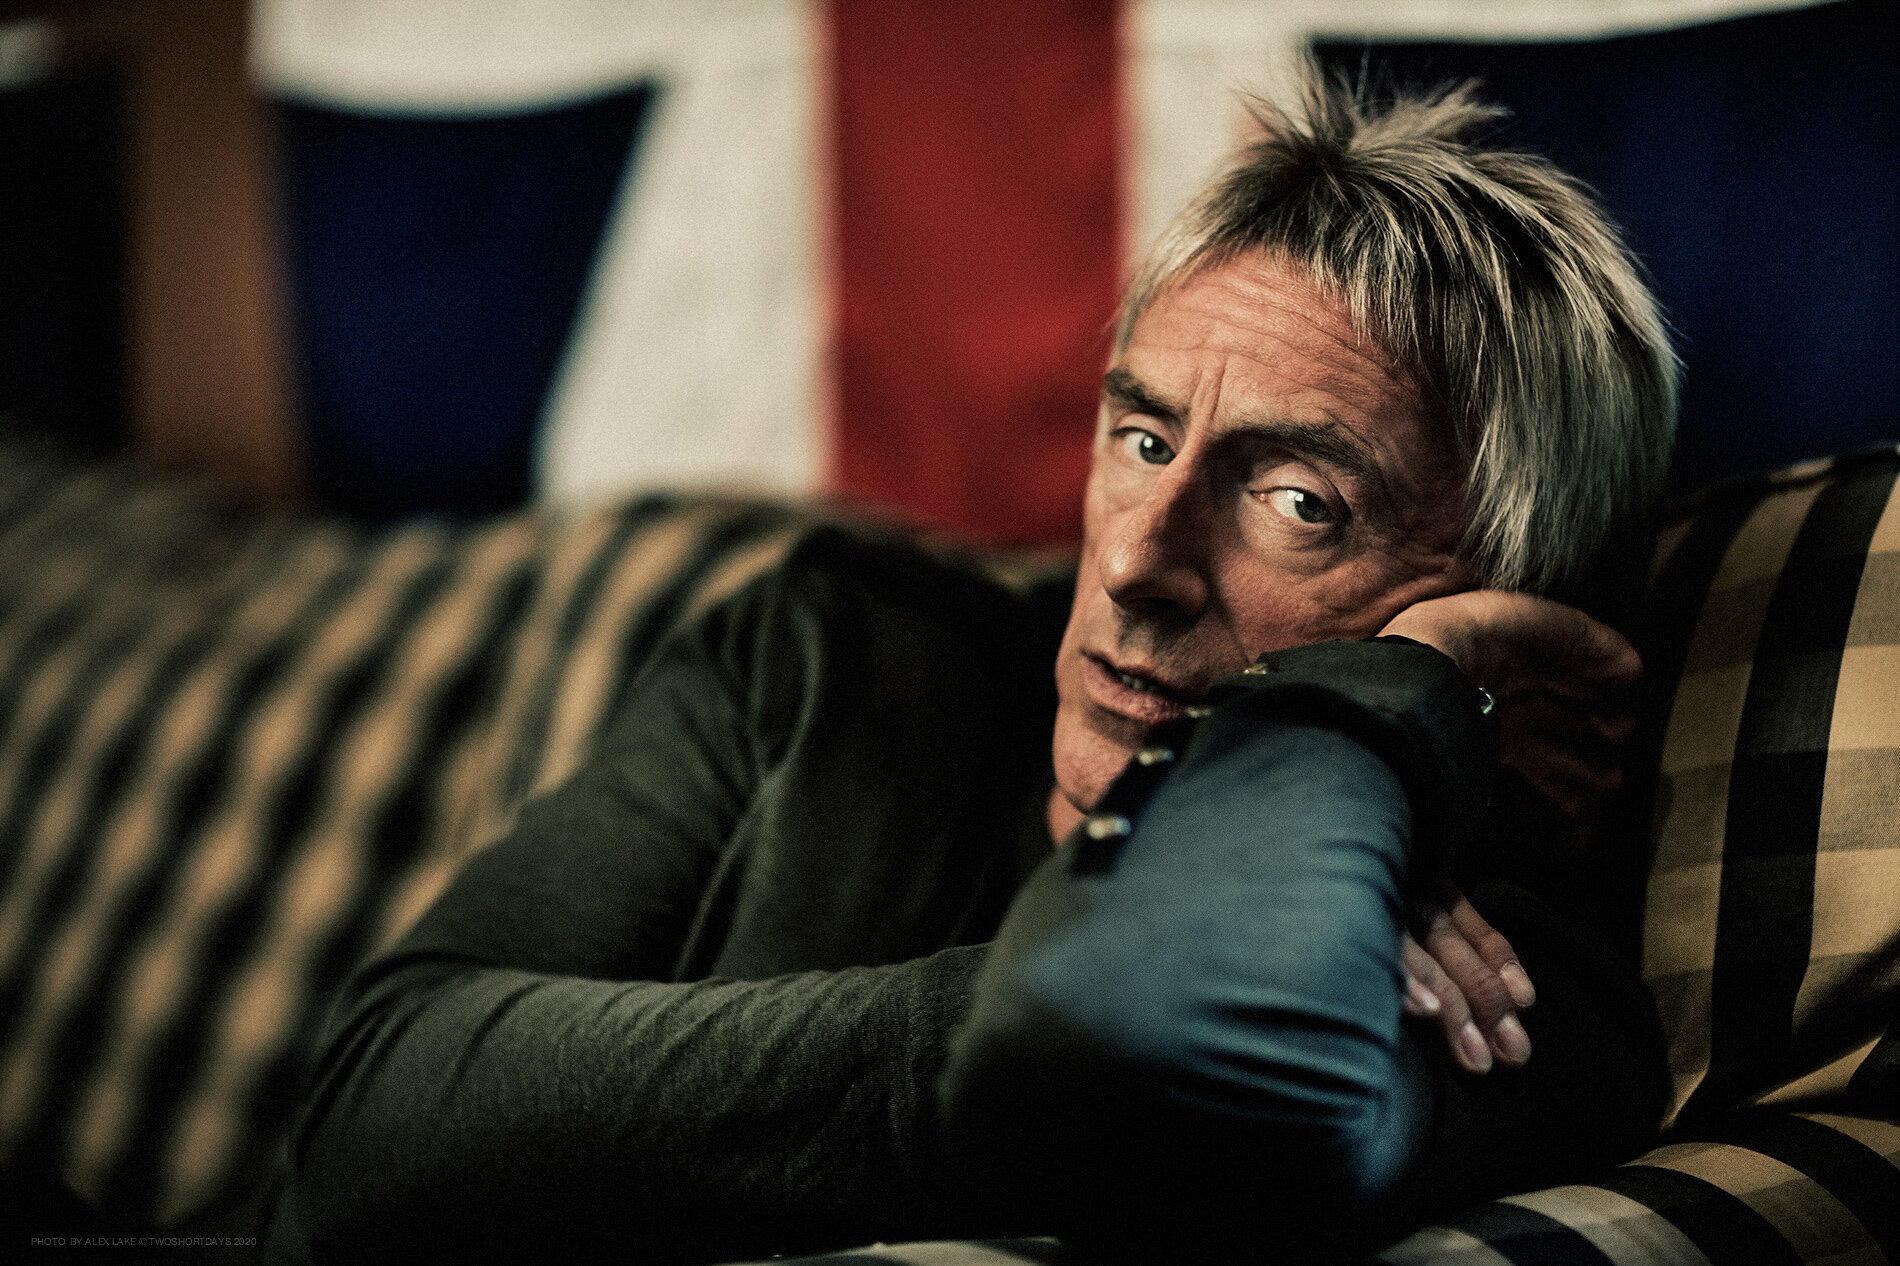 paul_weller_02_photography_copyright_ALEX_LAKE_do_not_reproduce_without_permission_TWOSHORTDAYS.jpg